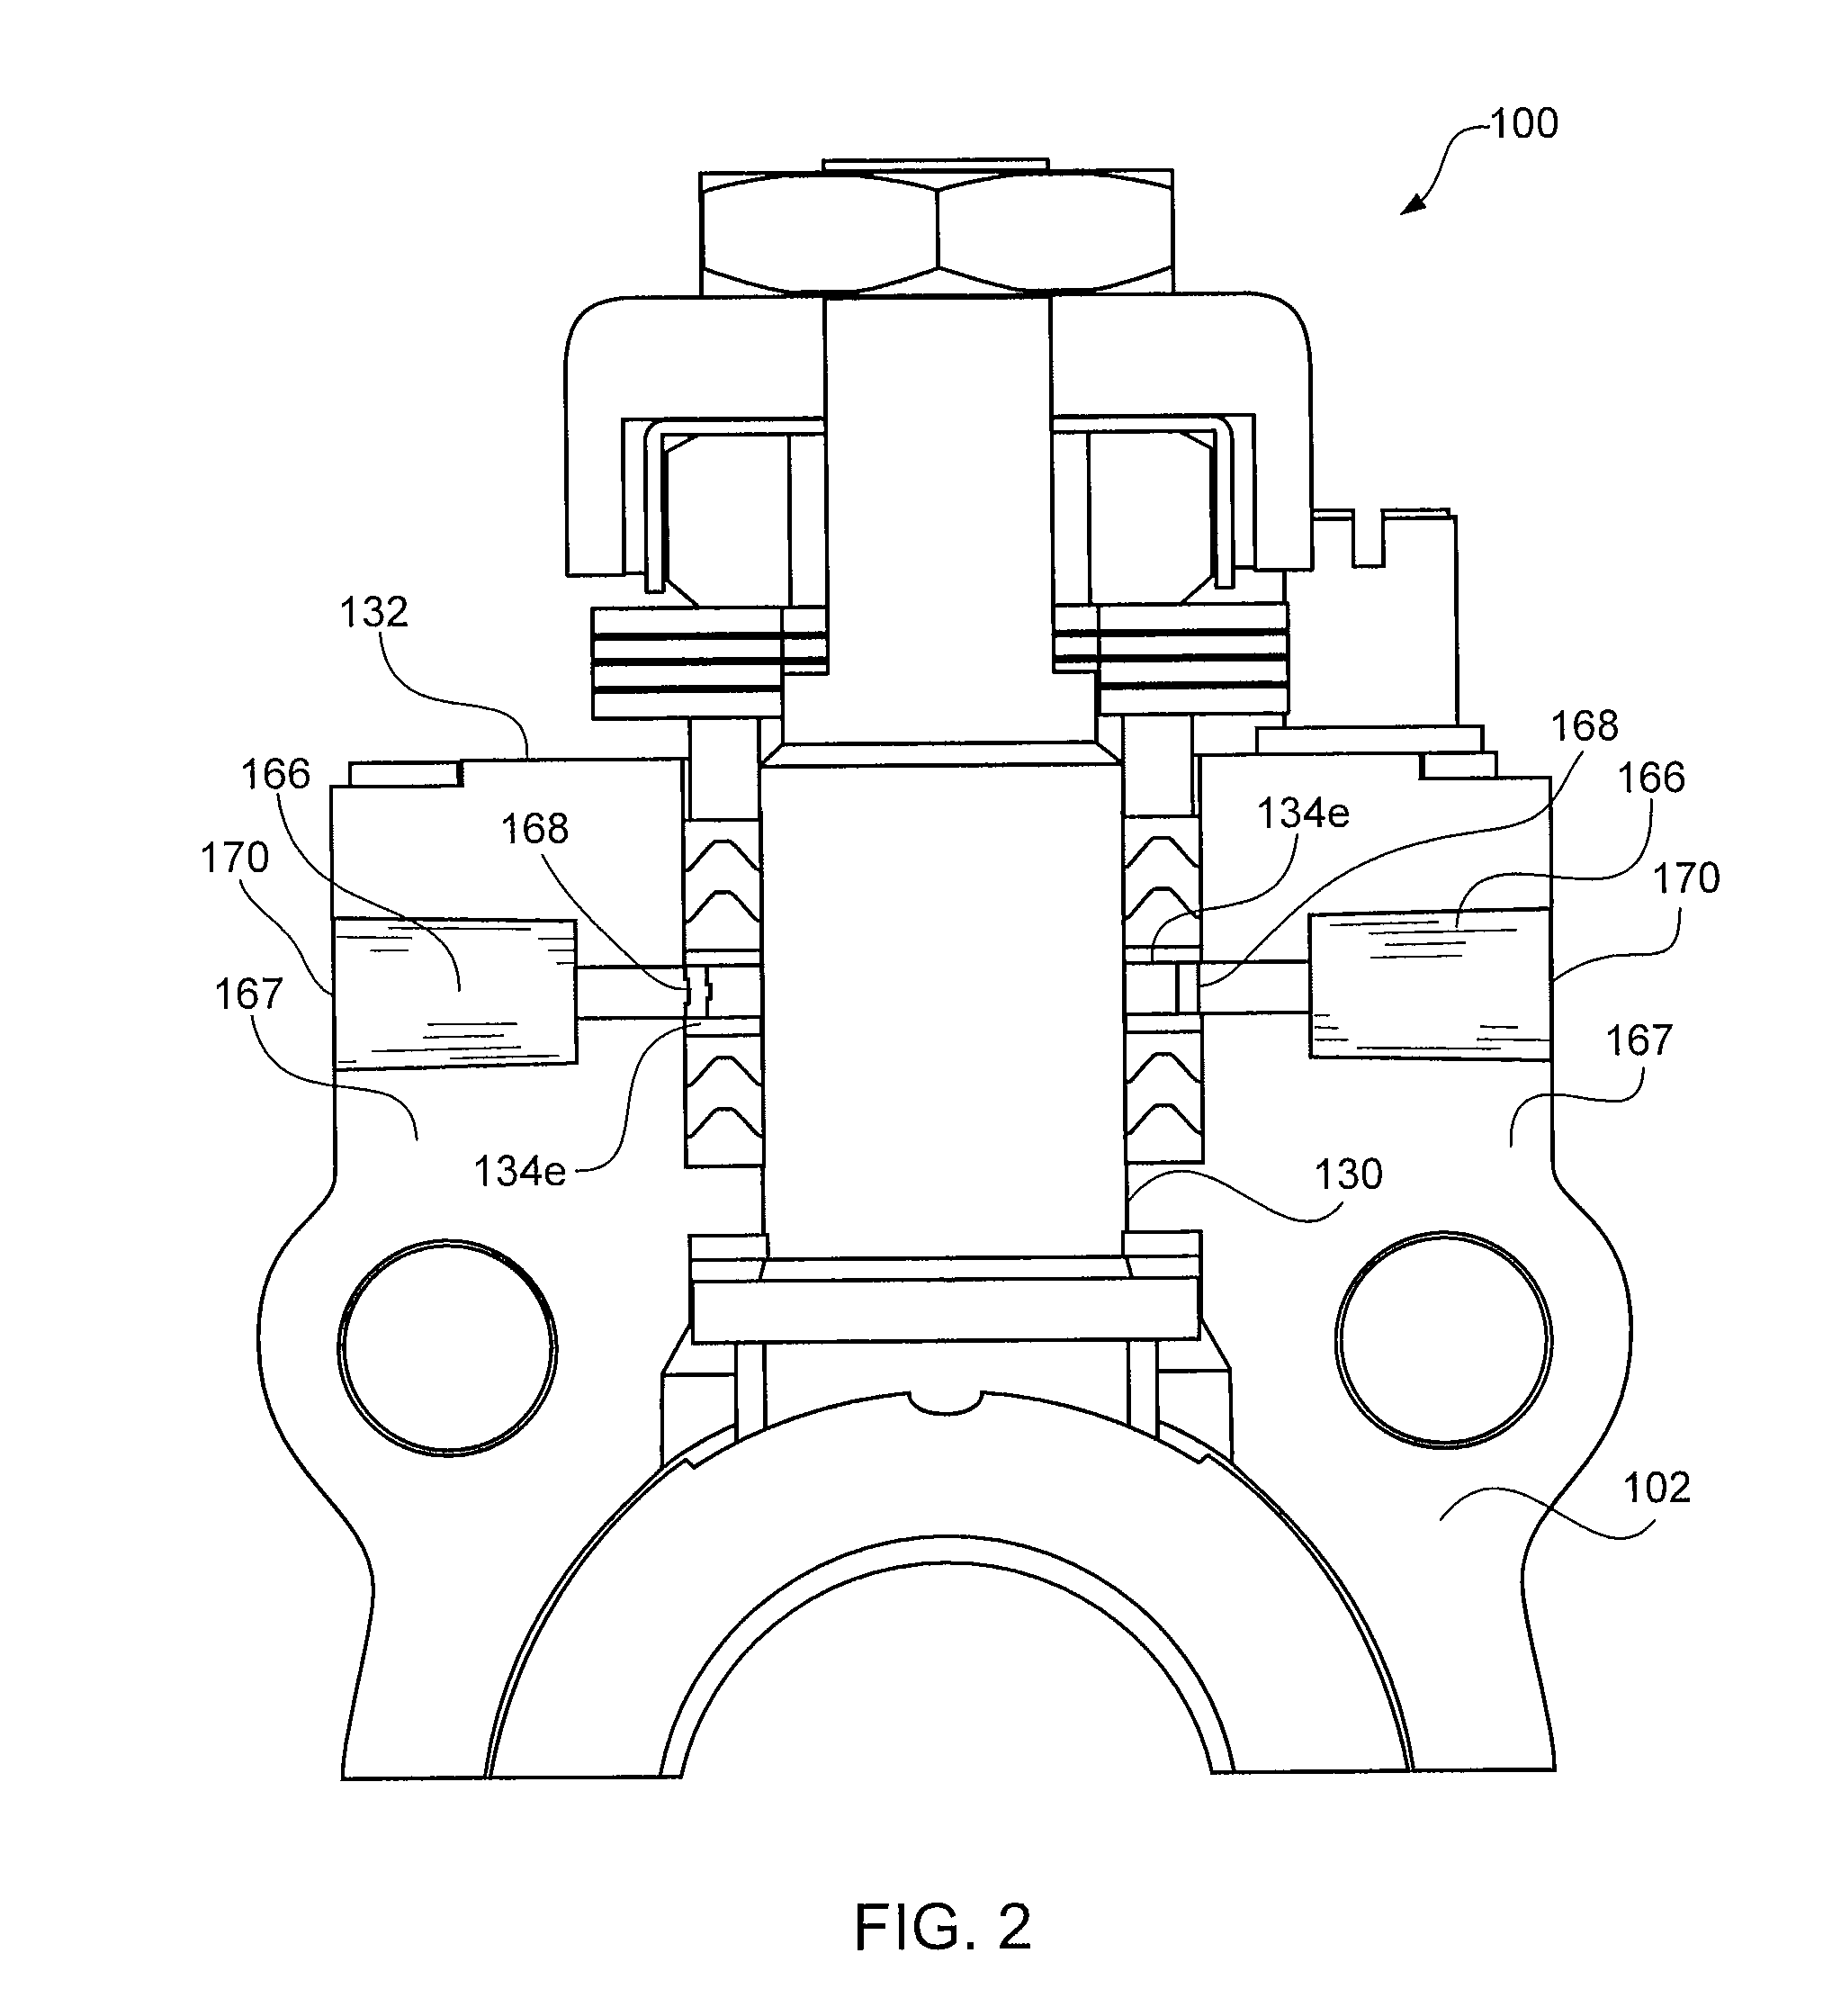 Ball valve with integrated fugitive emission assembly